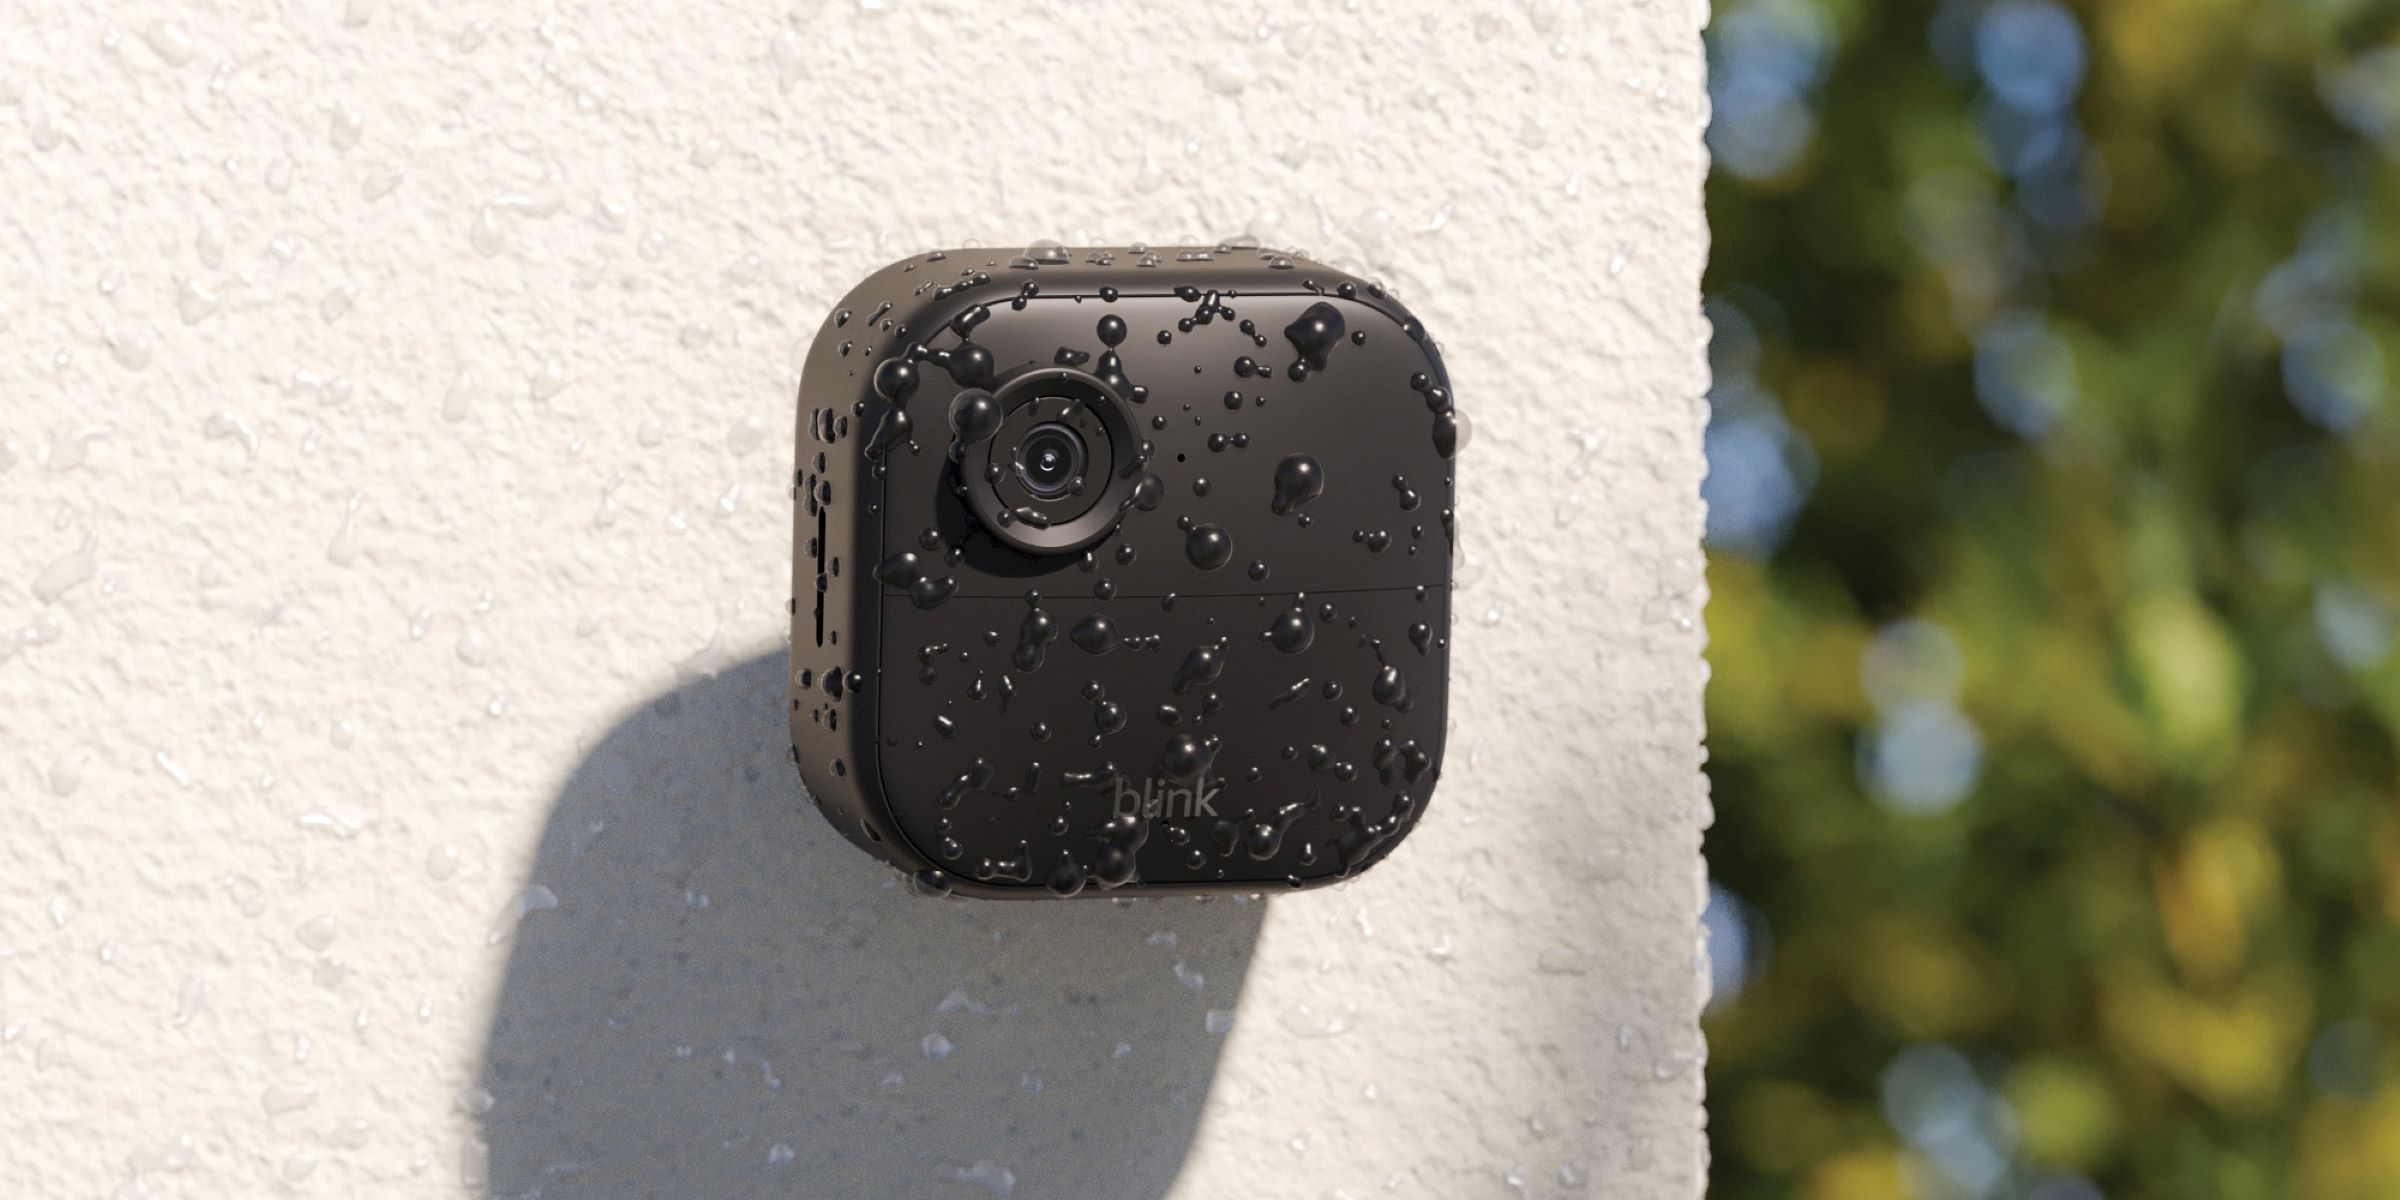 What Is The Range Of Blink Outdoor Camera